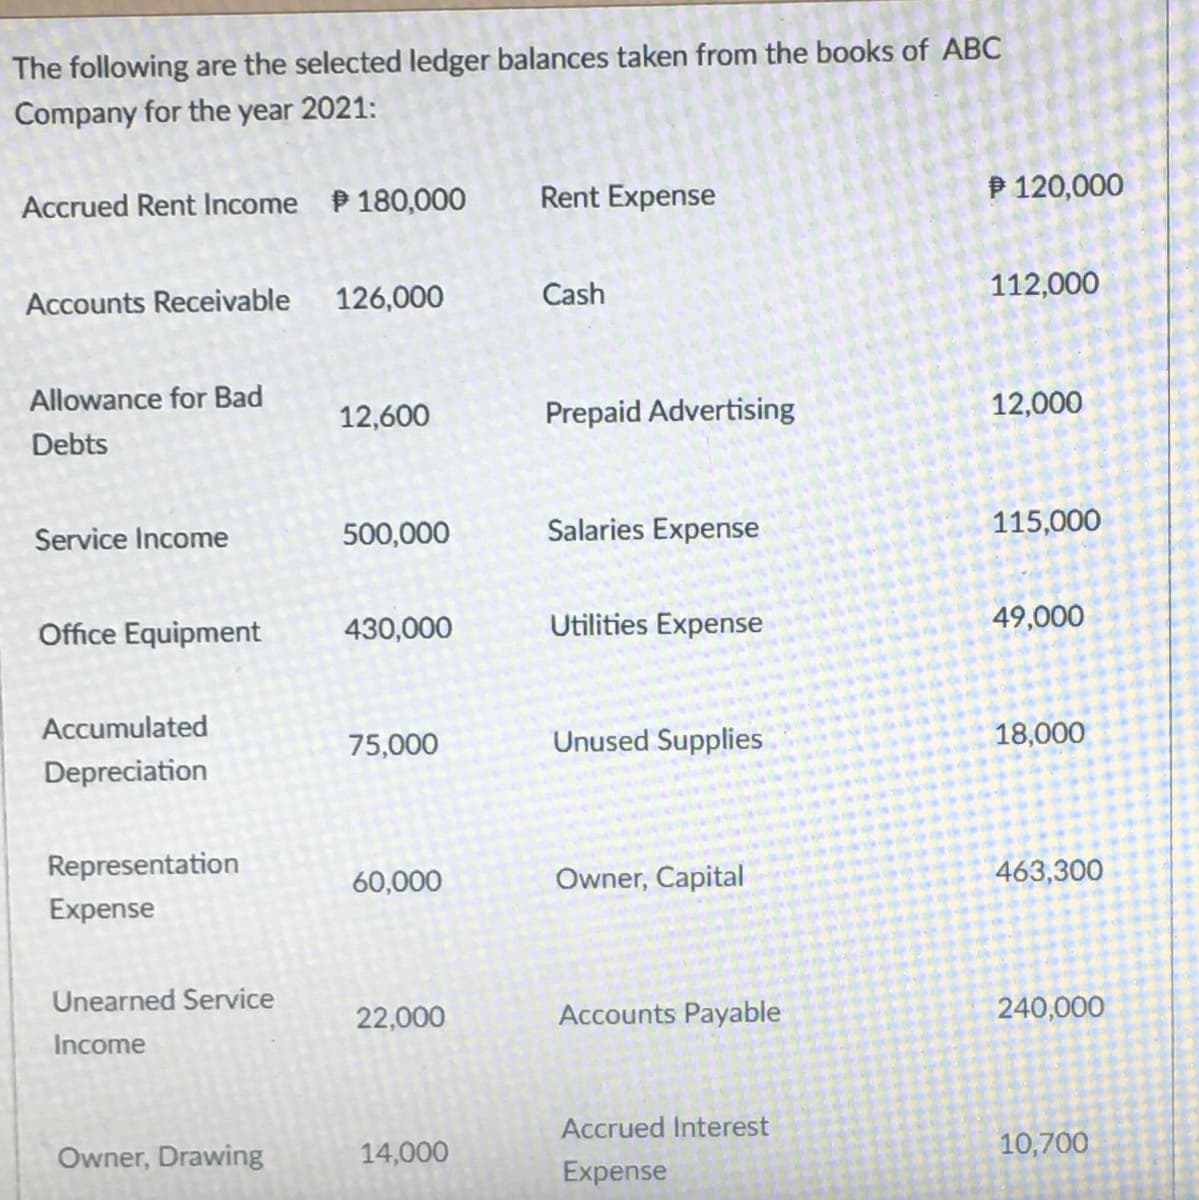 The following are the selected ledger balances taken from the books of ABC
Company for the year 2021:
Rent Expense
P 120,000
Accrued Rent Income P 180,000
126,000
Cash
112,000
Accounts Receivable
Allowance for Bad
12,600
Prepaid Advertising
12,000
Debts
500,000
Salaries Expense
115,000
Service Income
Office Equipment
430,000
Utilities Expense
49,000
Accumulated
75,000
Unused Supplies
18,000
Depreciation
Representation
60,000
Owner, Capital
463,300
Expense
Unearned Service
22,000
Accounts Payable
240,000
Income
Accrued Interest
Owner, Drawing
14,000
10,700
Expense
